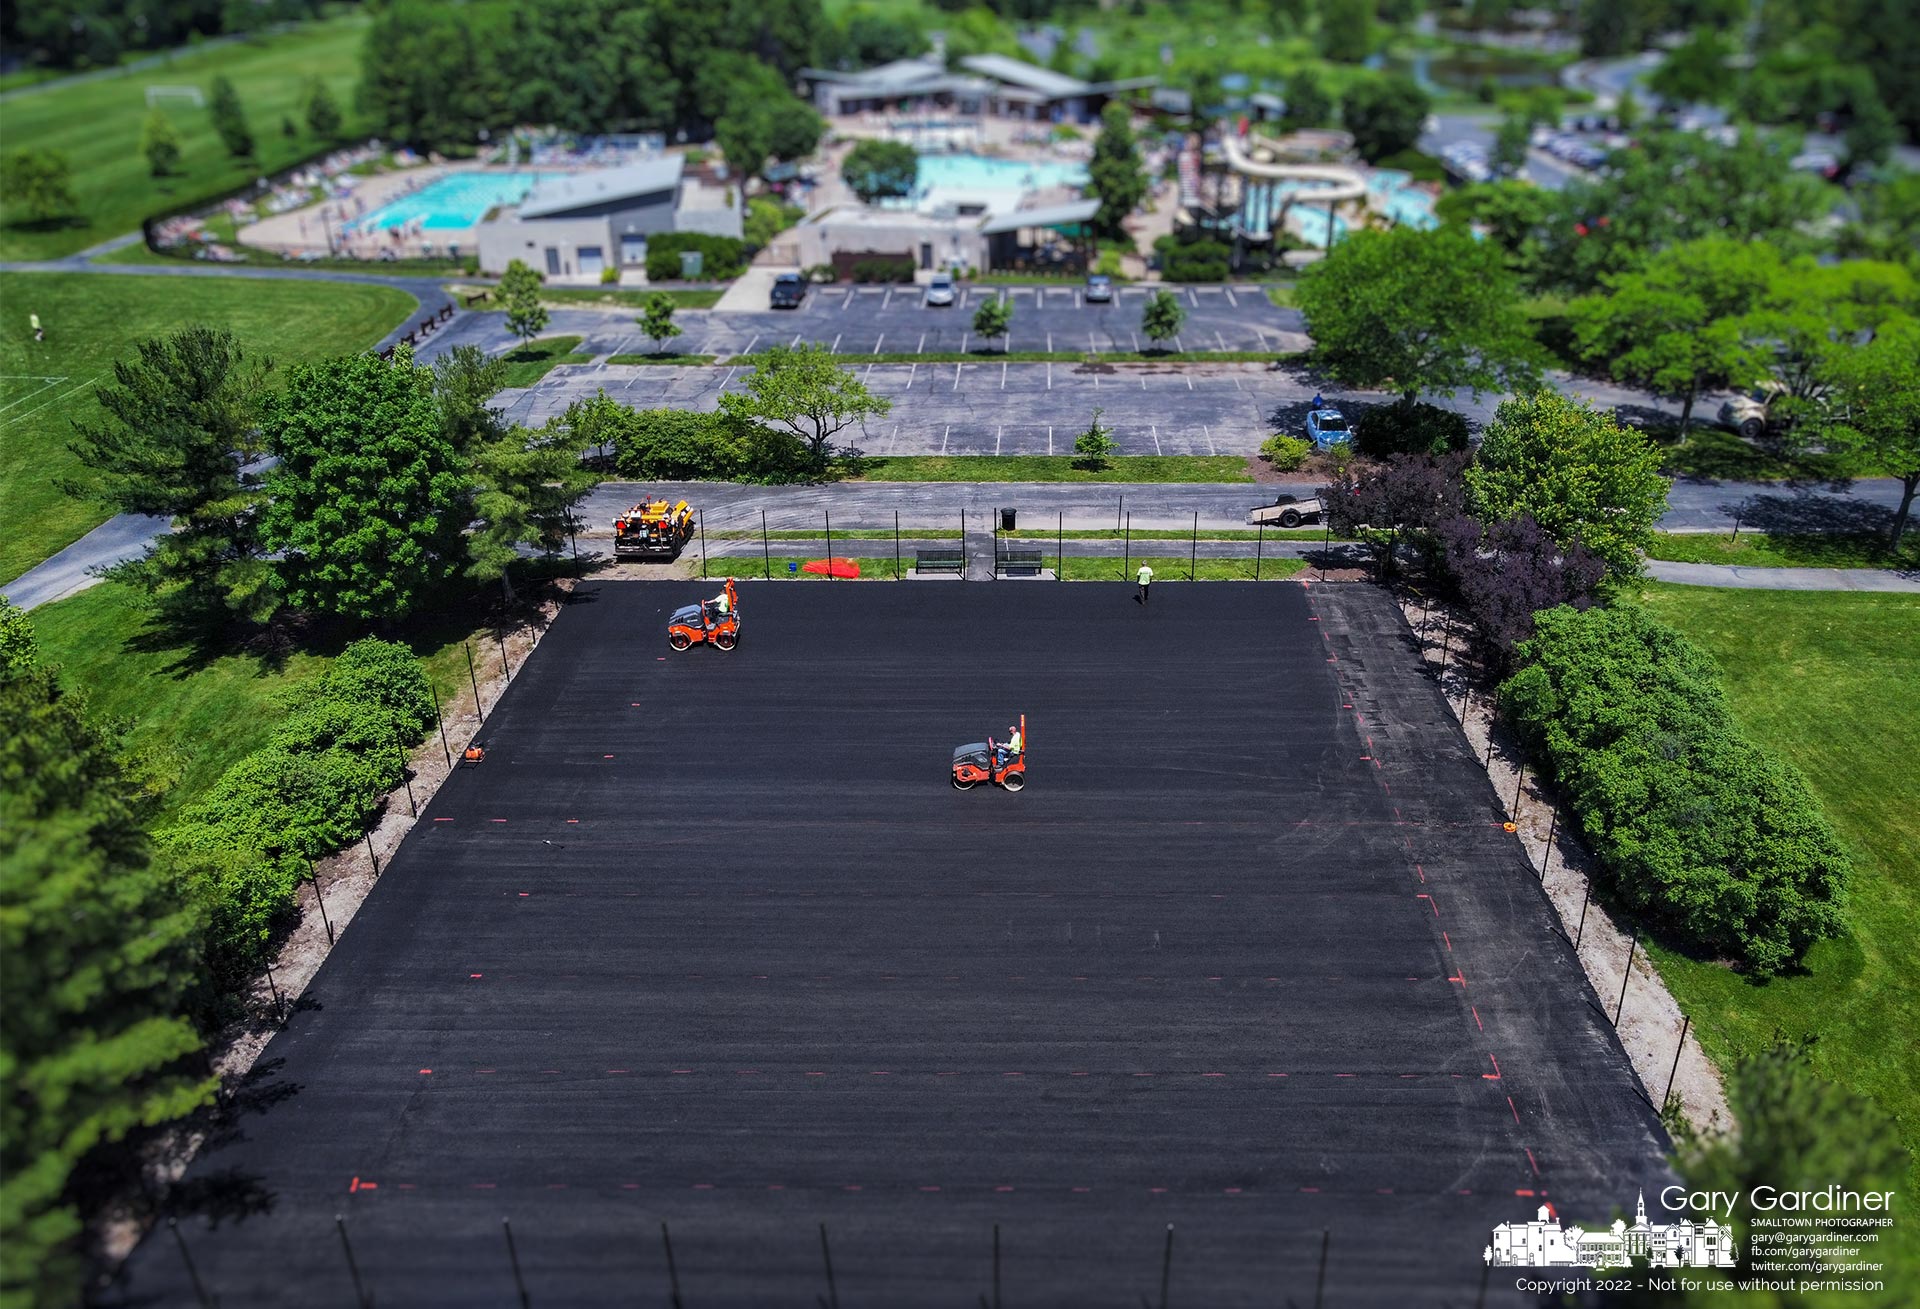 A pair of steamrollers compress the first layer of asphalt at the highlands tennis courts where the city updates the surface. My Final Photo for June 3, 2022.